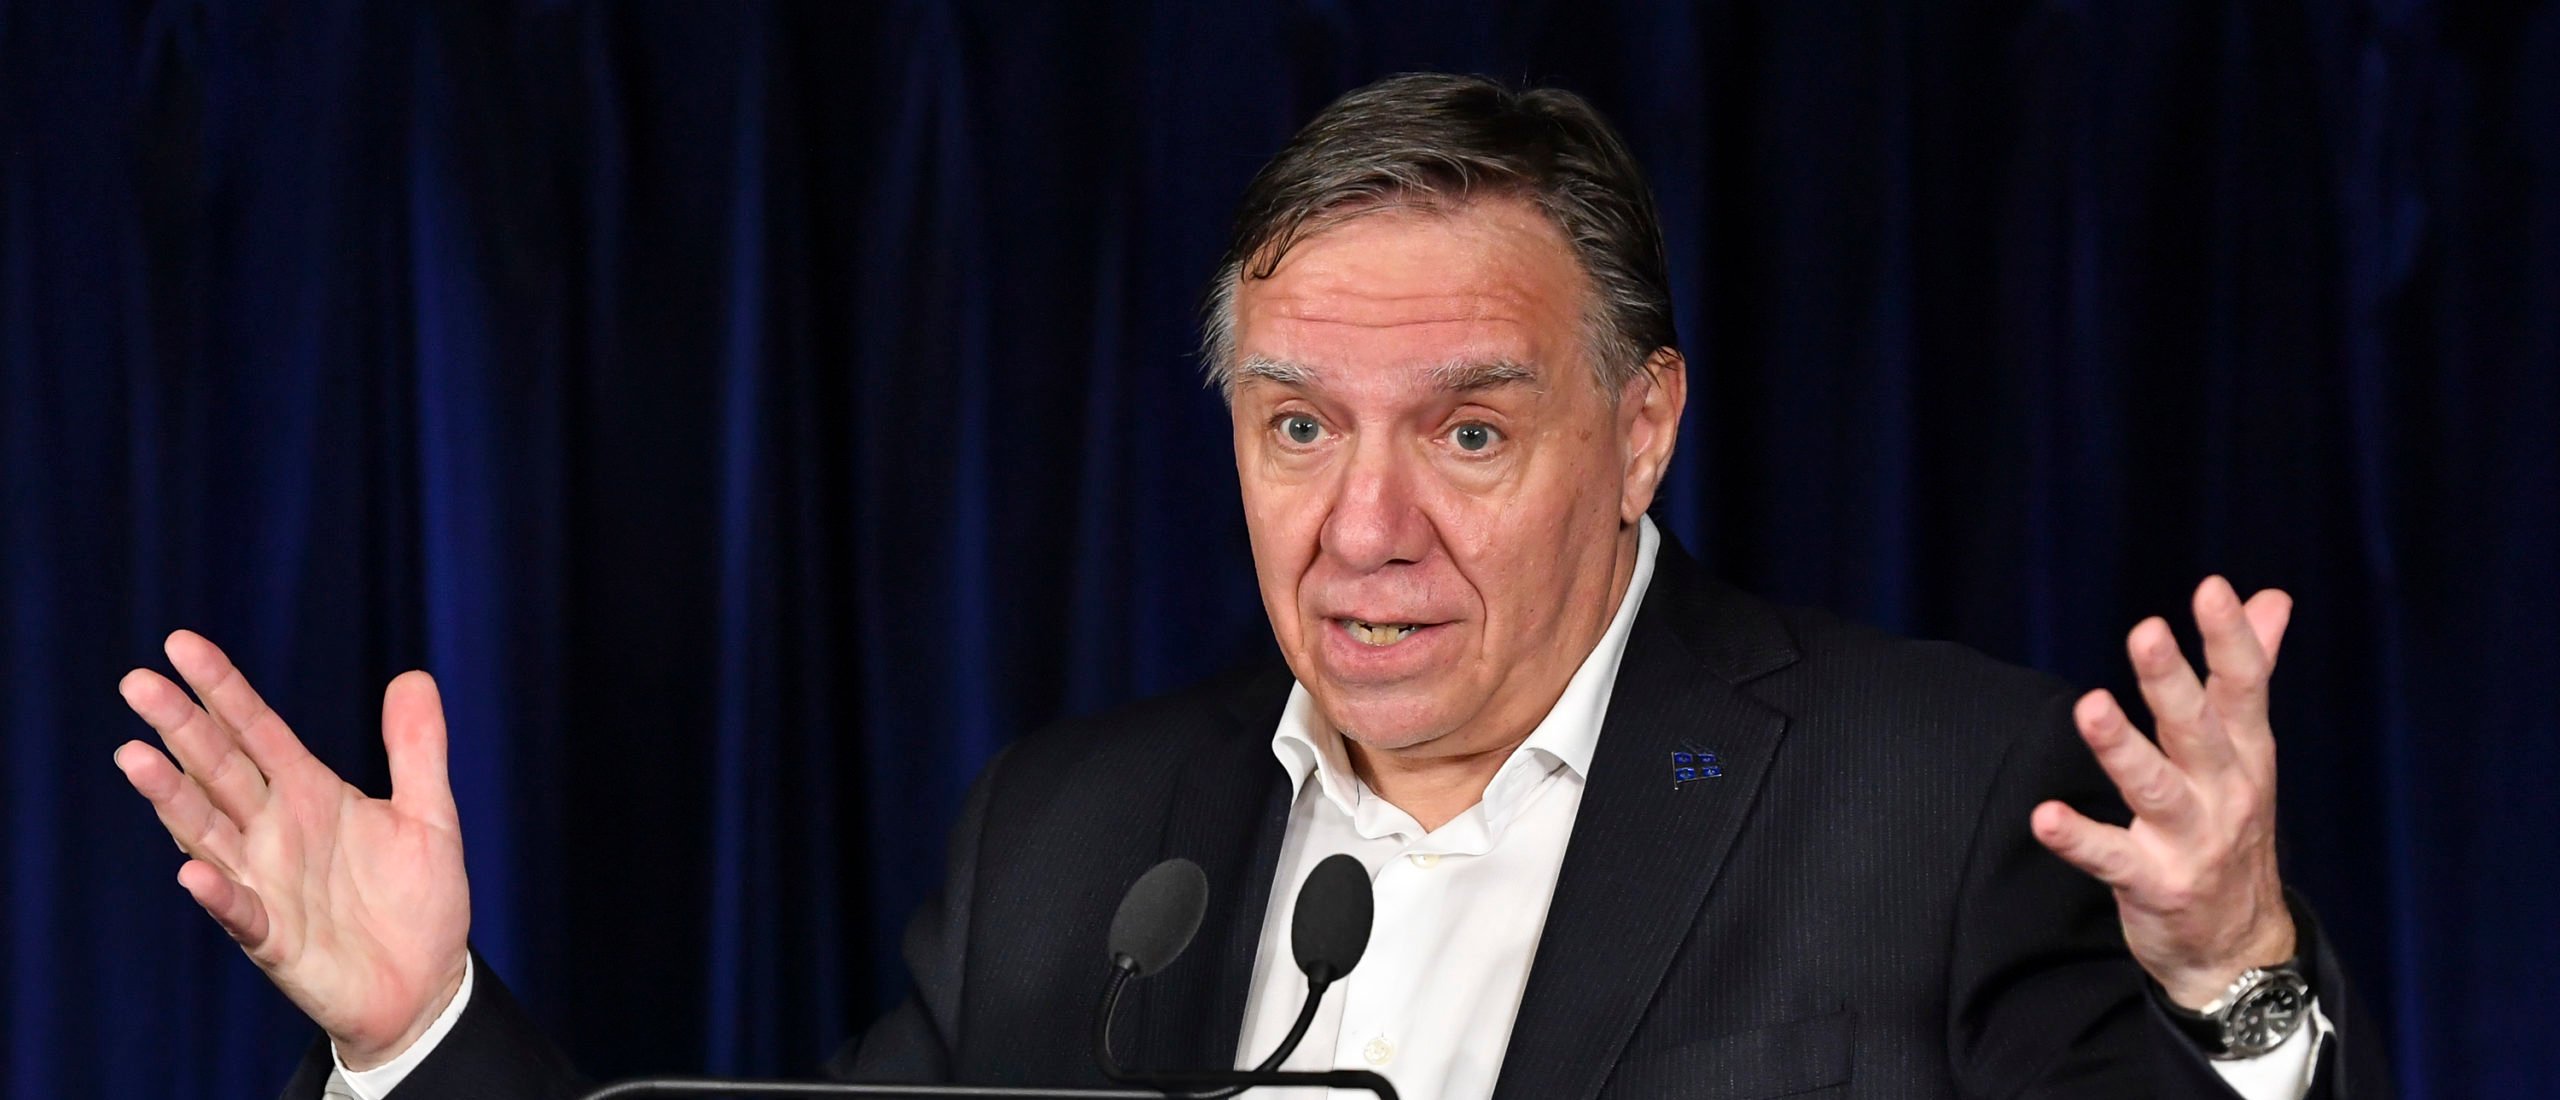 The Premier of Quebec François Legault, announces a plan to develop the game of hockey within the province of Quebec and to increase the number of Quebec born players in the NHL, prior to the game between the Montreal Canadiens and the Pittsburgh Penguins at Centre Bell on November 18, 2021 in Montreal, Canada.